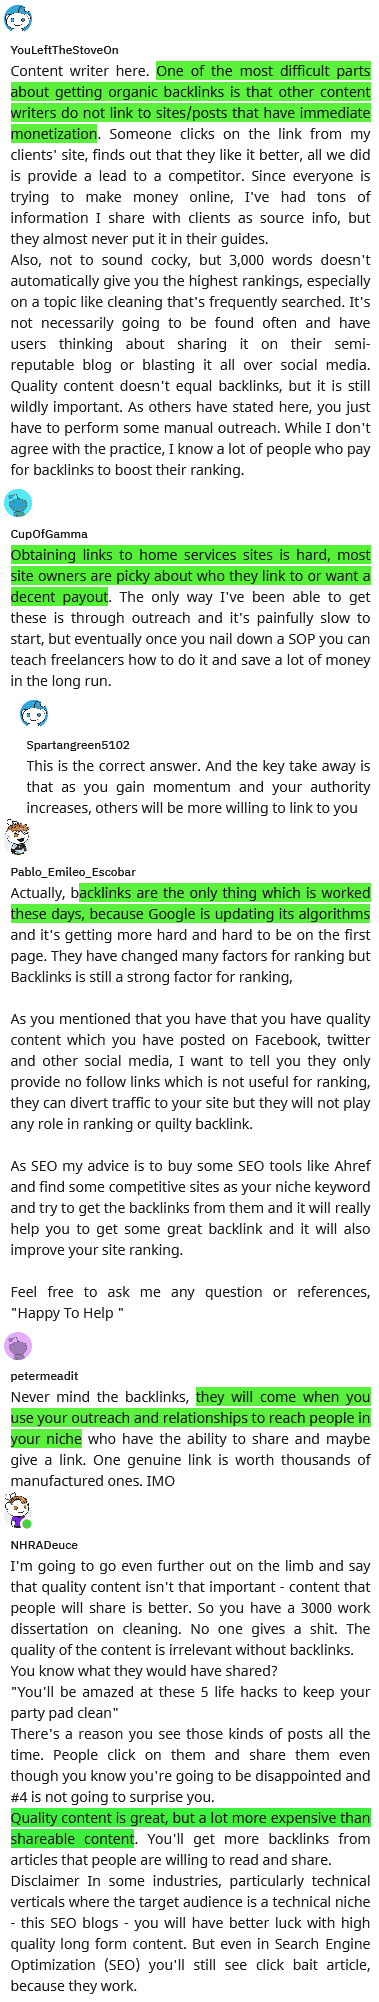 hoping people make backlinks for the quality content wherein your sites may be an obsolete whitehat way